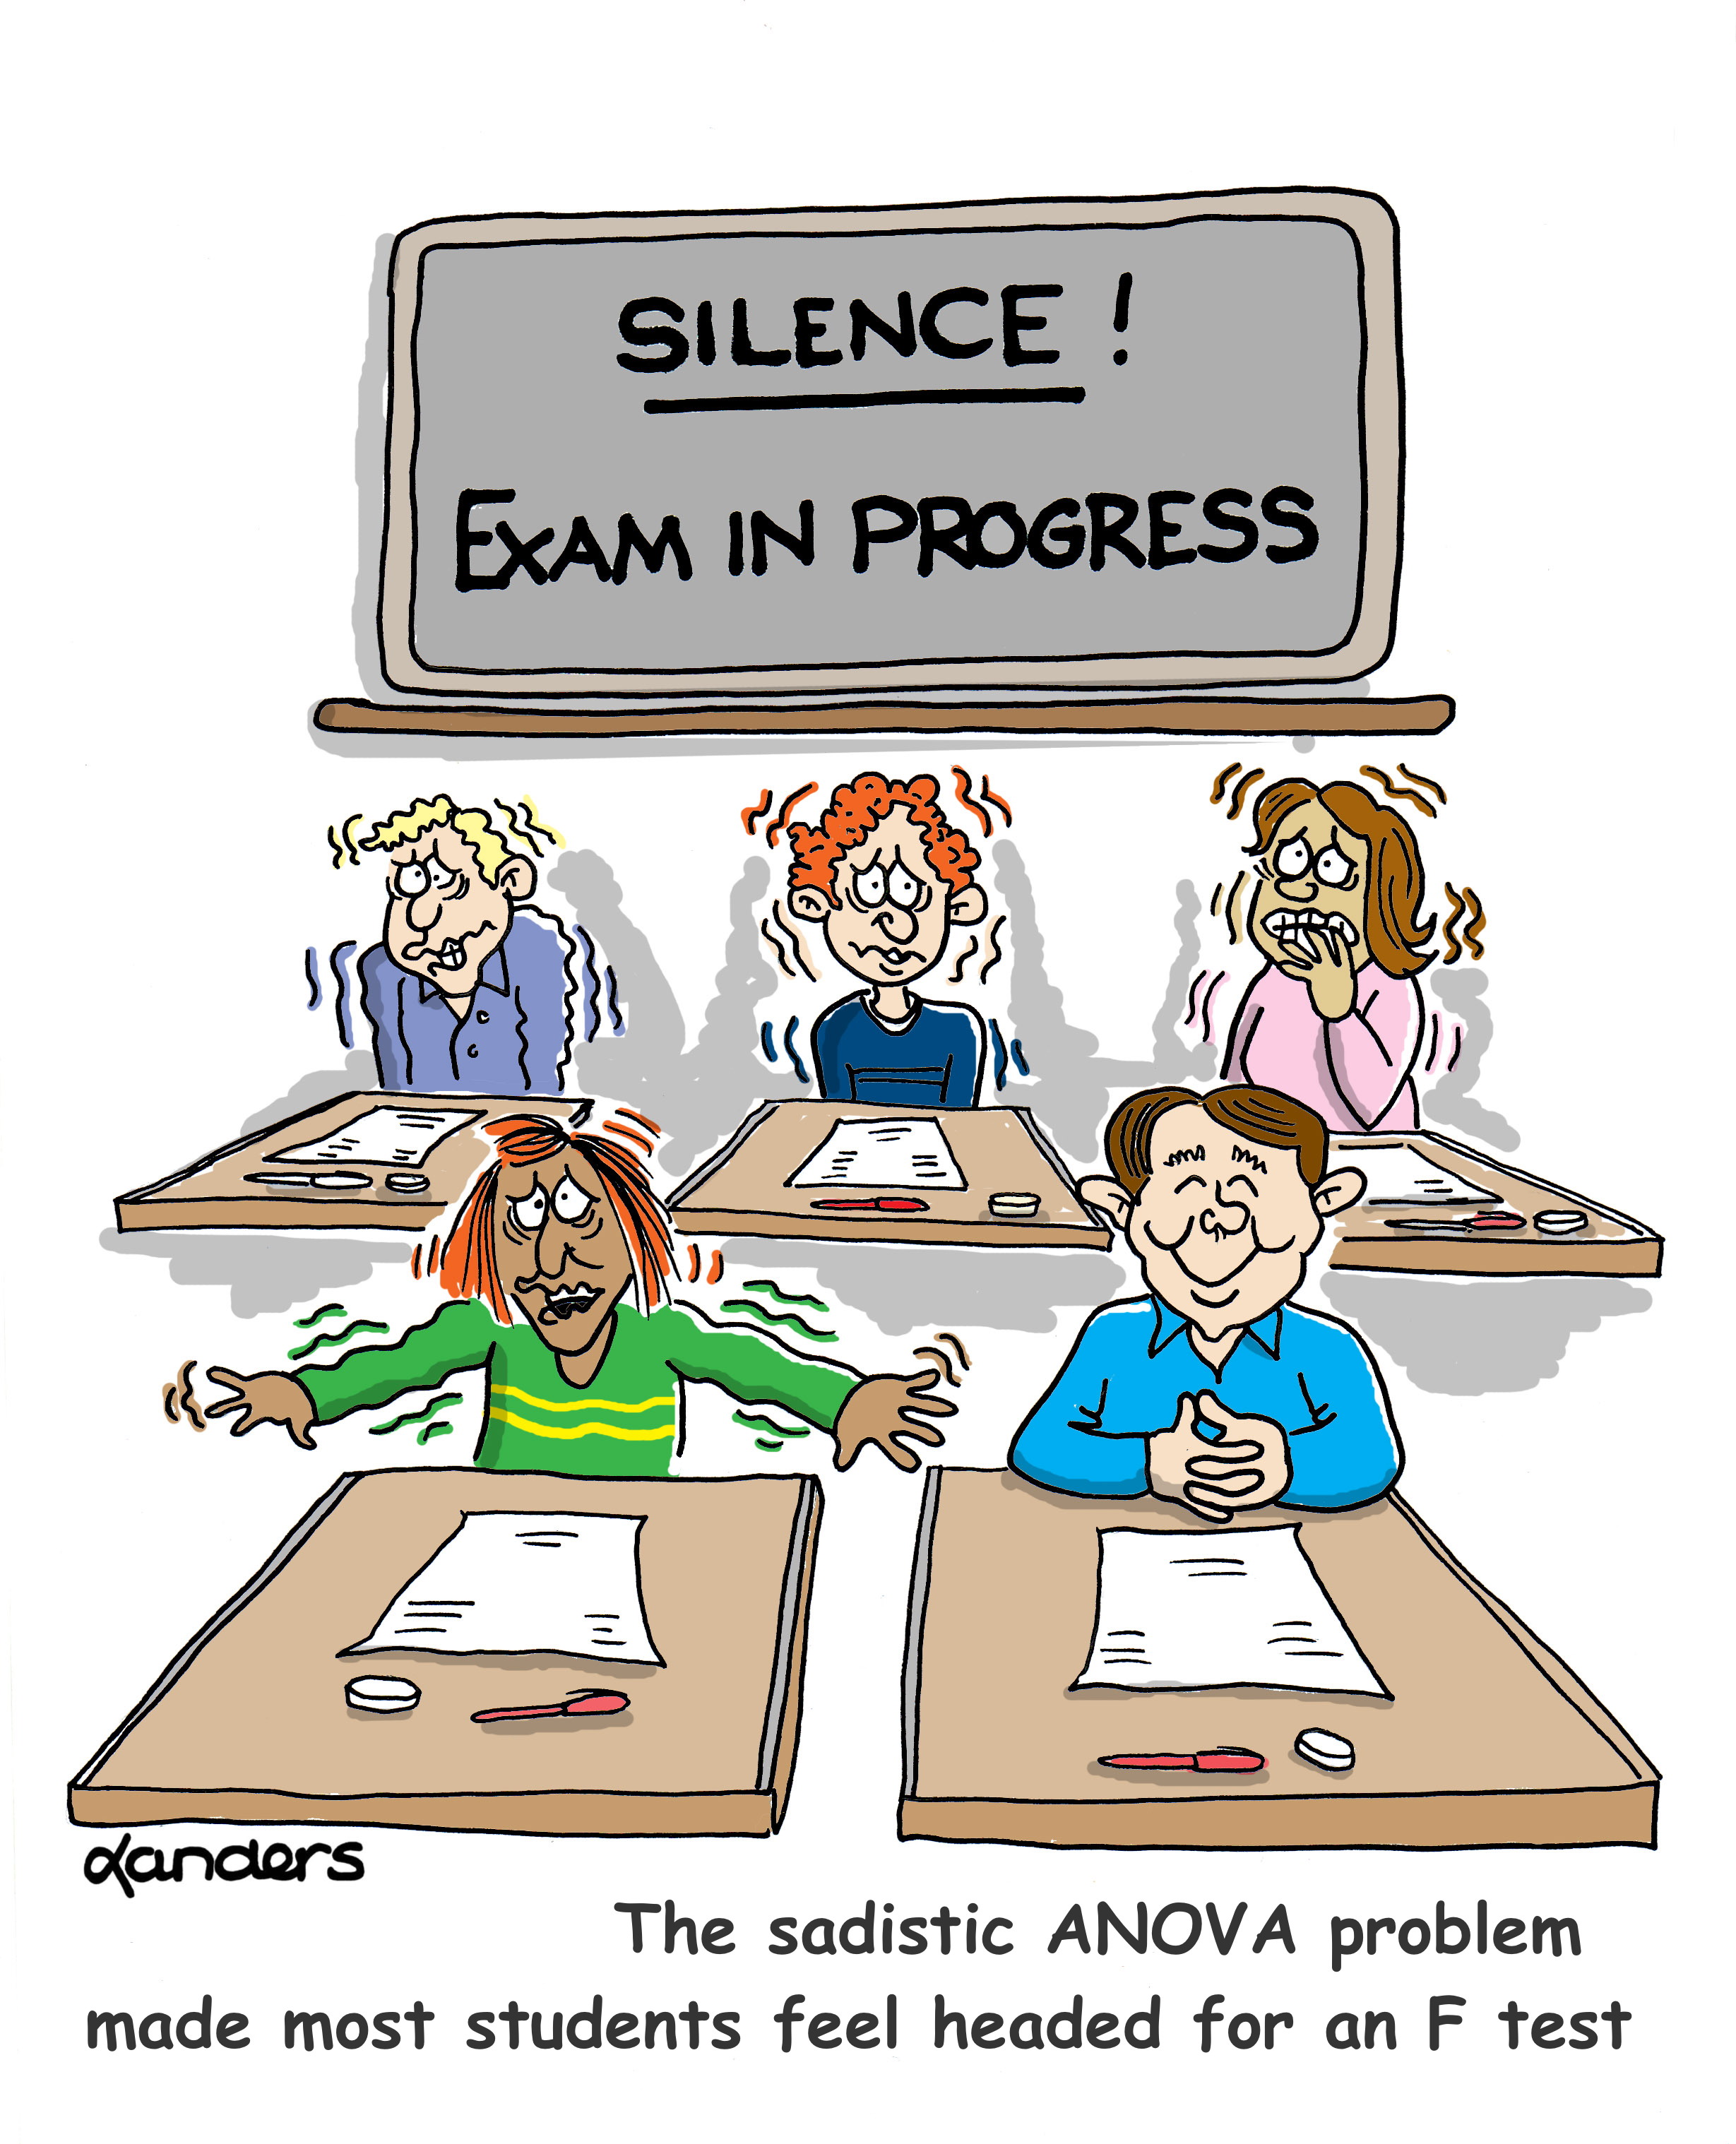 cartoon showing five students taking a test with 4 appearing very anxious and one appearing very calm